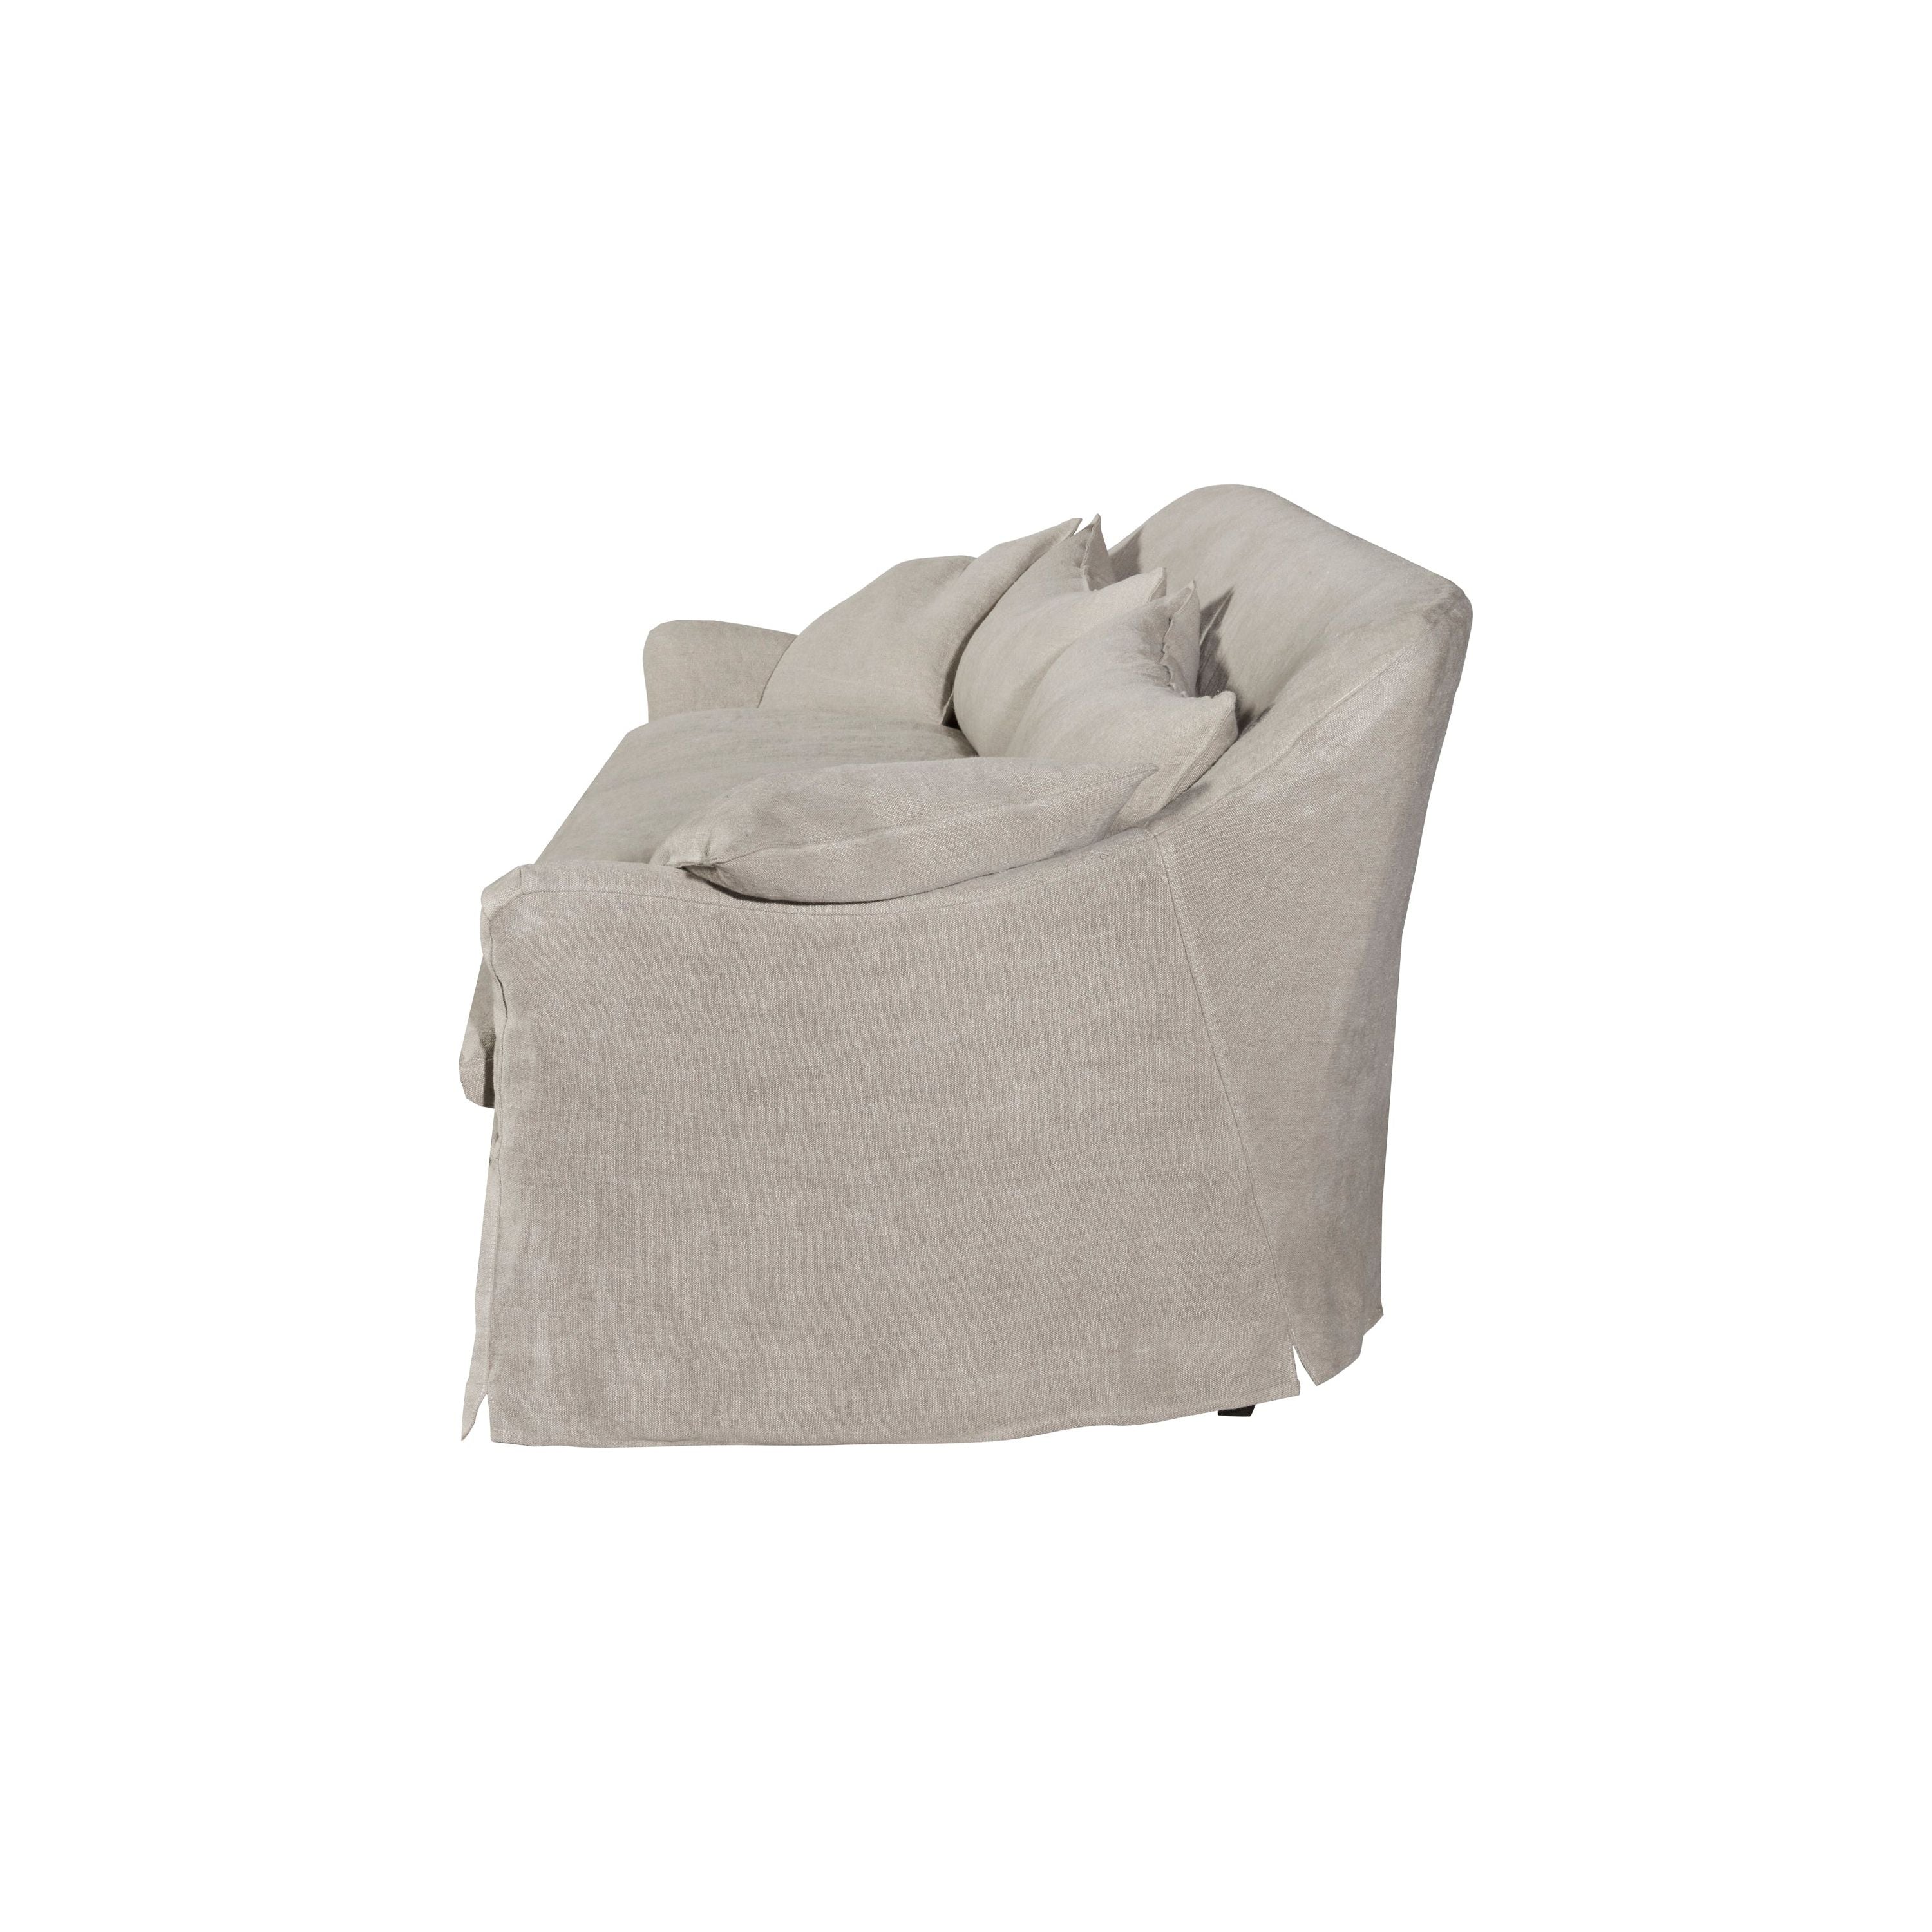 The slipcovered Hazel Sofa by Cisco Brothers comes with a down feather pillow top cushion. Made in LA with a 8 way hand-tied construction for irresistable comfort. As shown slipcovered in Quixote Oatmeal 100% linen. Available in 4 sizes: